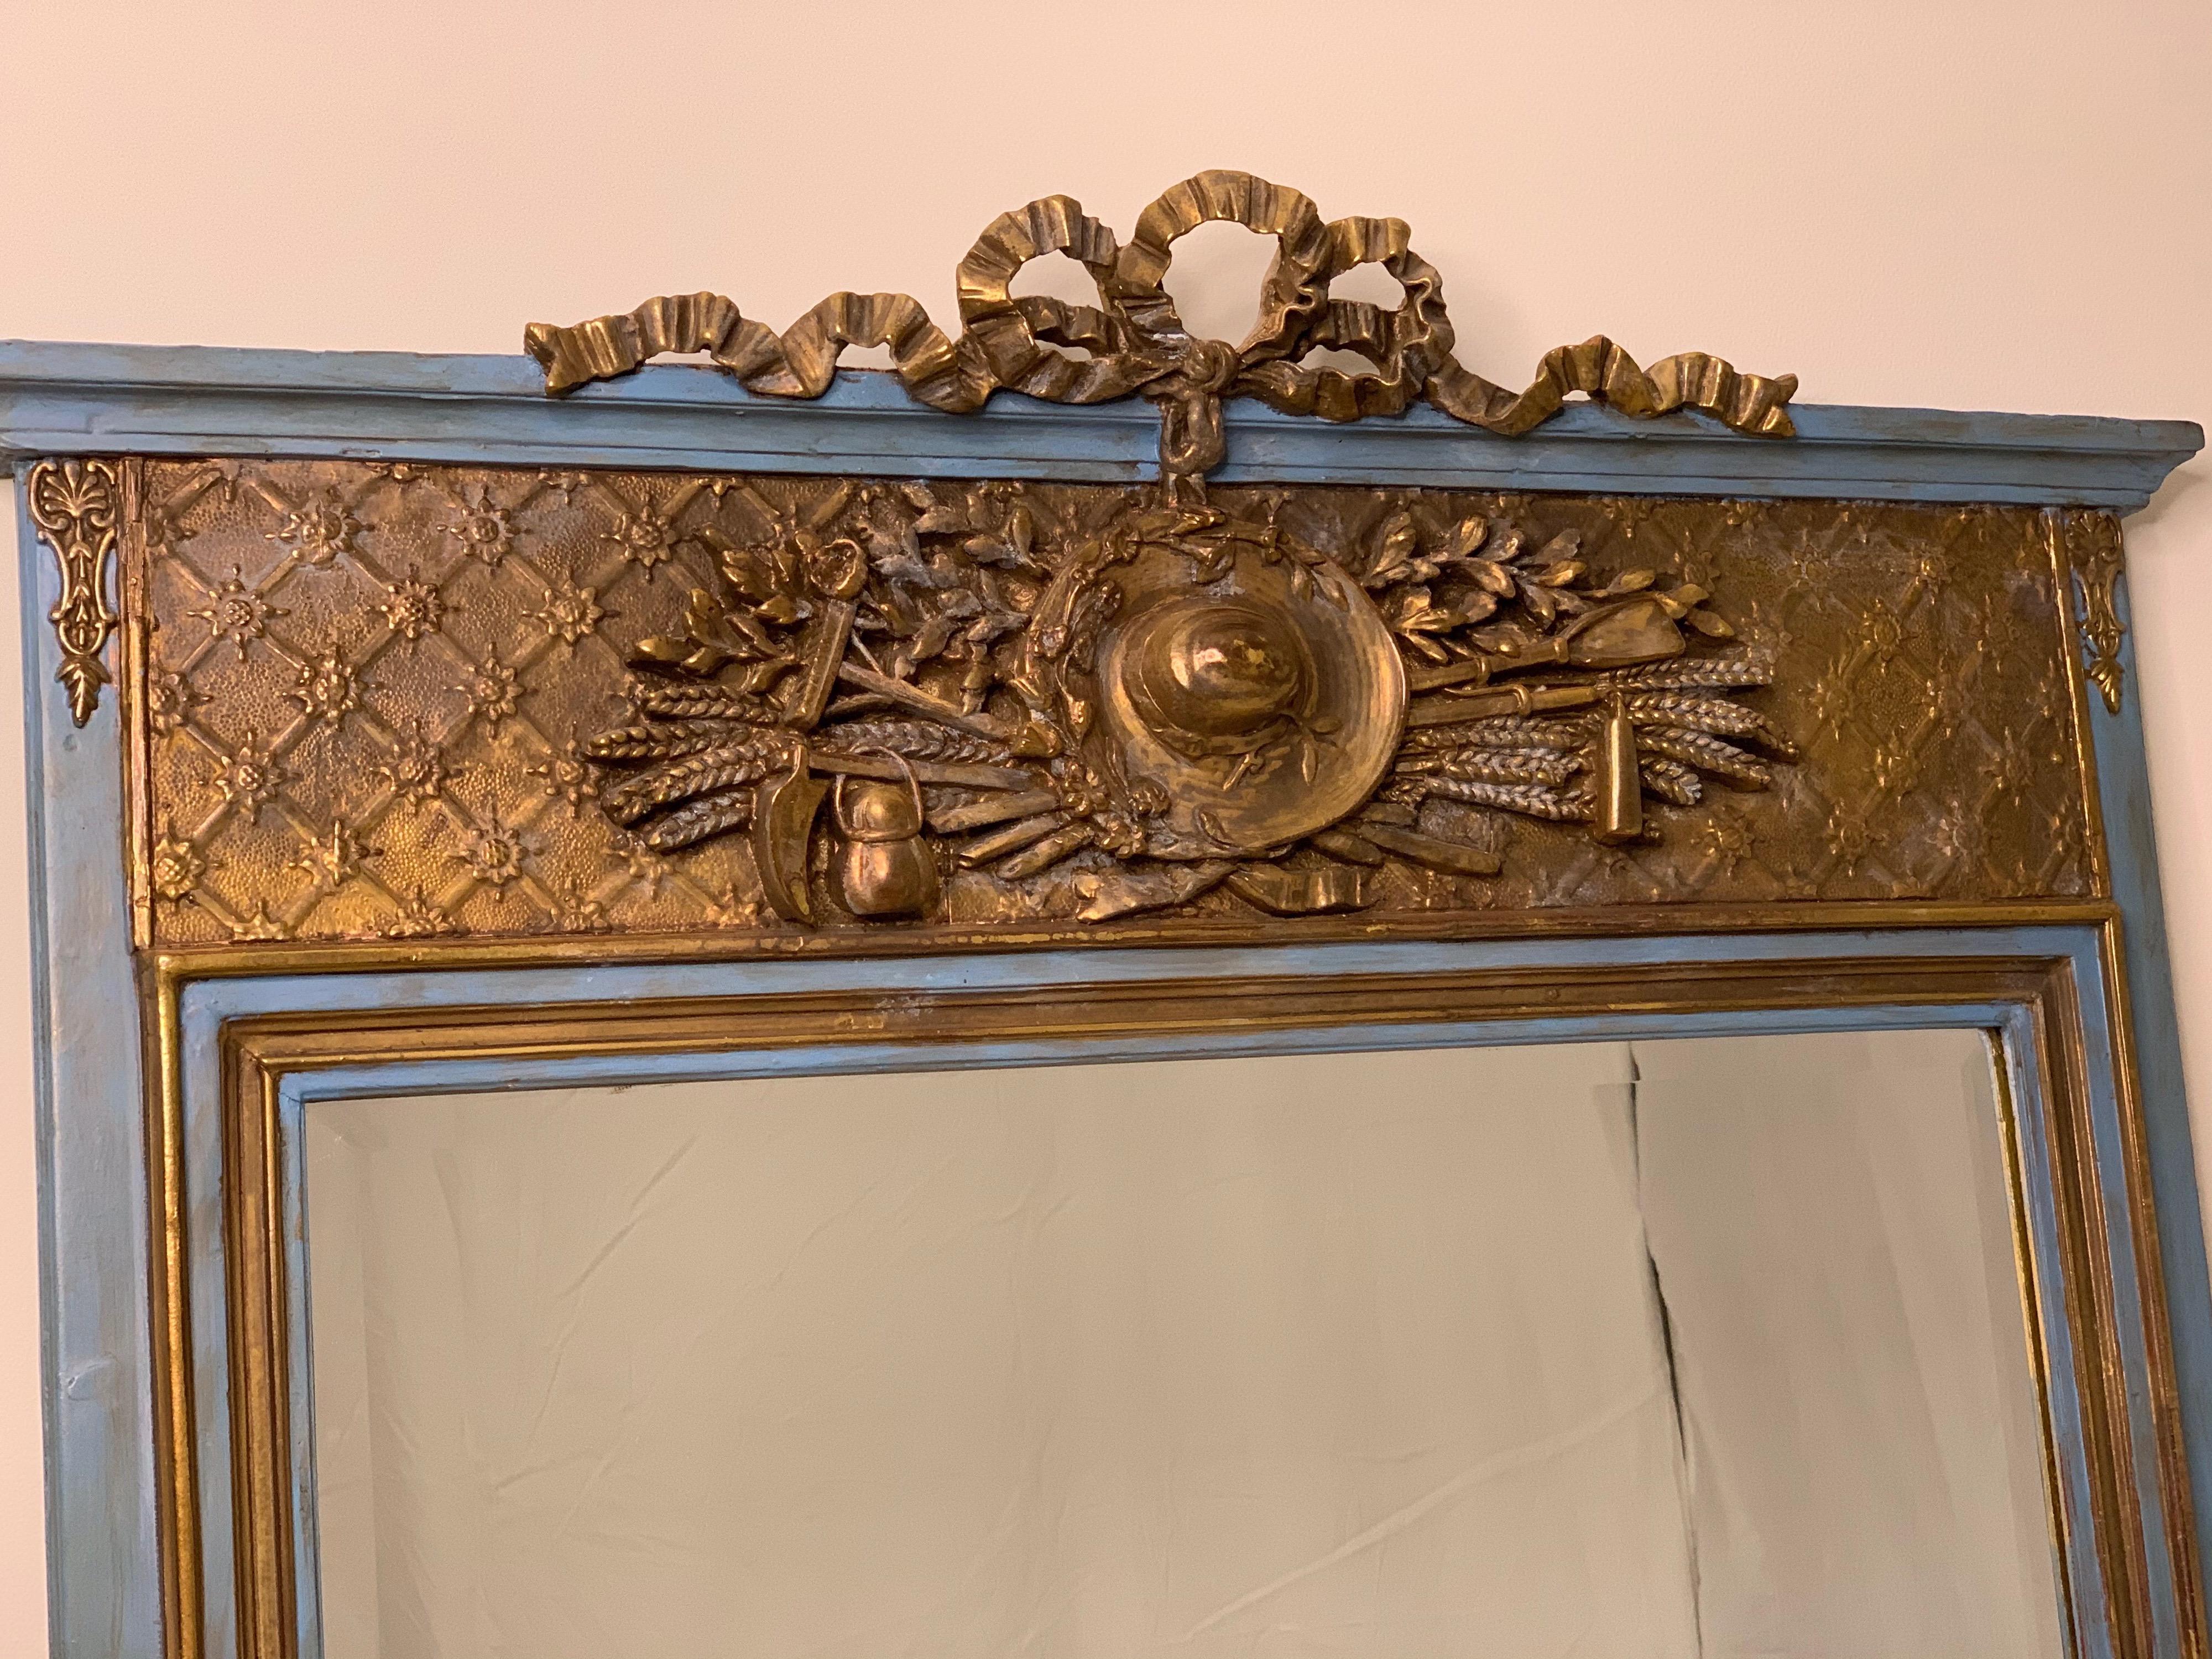 Early 19th century Louis XVI style painted and parcel-gilt mirror
Back template has been replaced, blue paint is an addition at a later date. The structure of the mirror is original.
Dimensions: 33.5